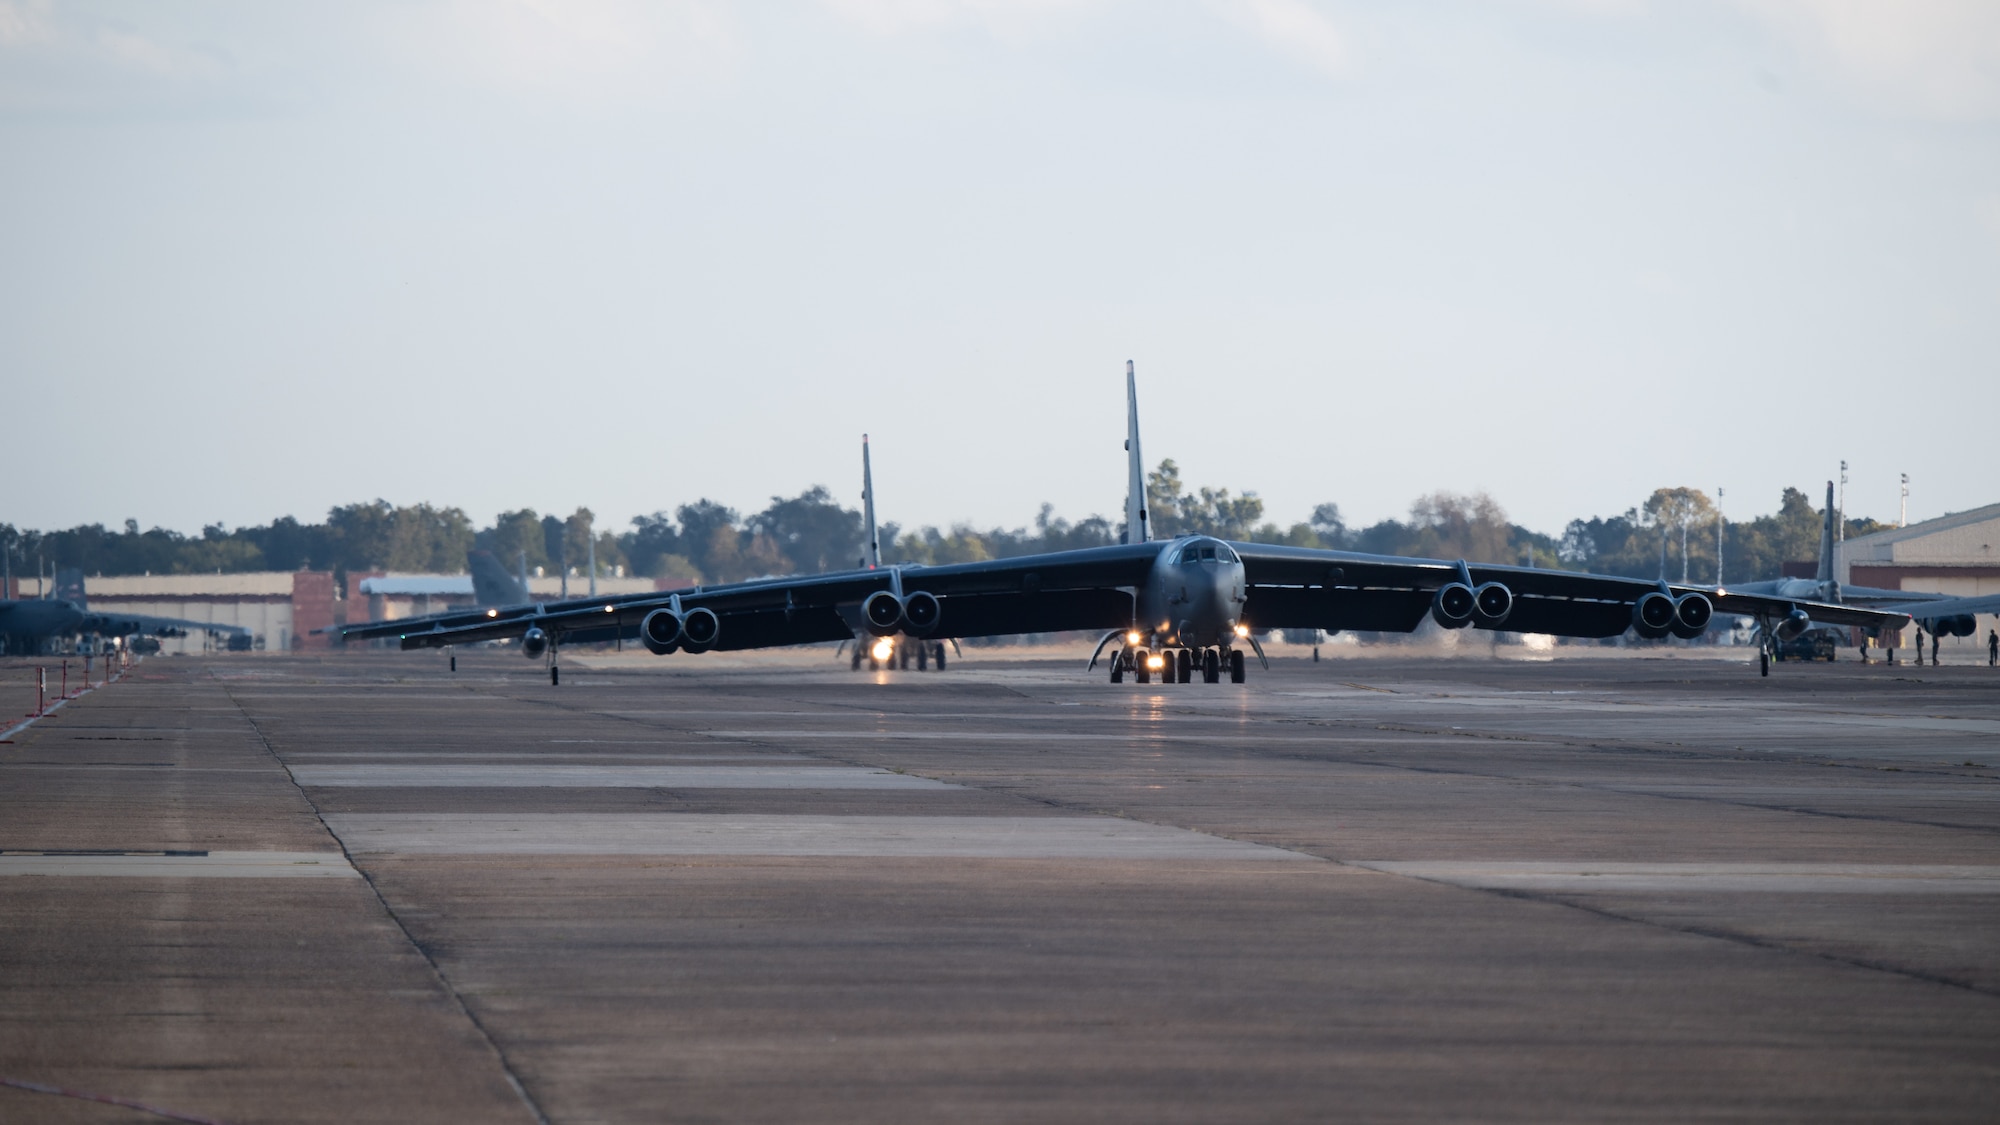 Two B-52H Stratofortresses taxi the flight line at Barksdale Air Force Base, La., as part of Global Thunder 21, Oct. 20, 2020. GLOBAL THUNDER is an annual command and control exercise designed to train U.S. Strategic Command forces and assess joint operational readiness. (U.S. Air Force photo by Airman 1st Class Jacob B. Wrightsman)